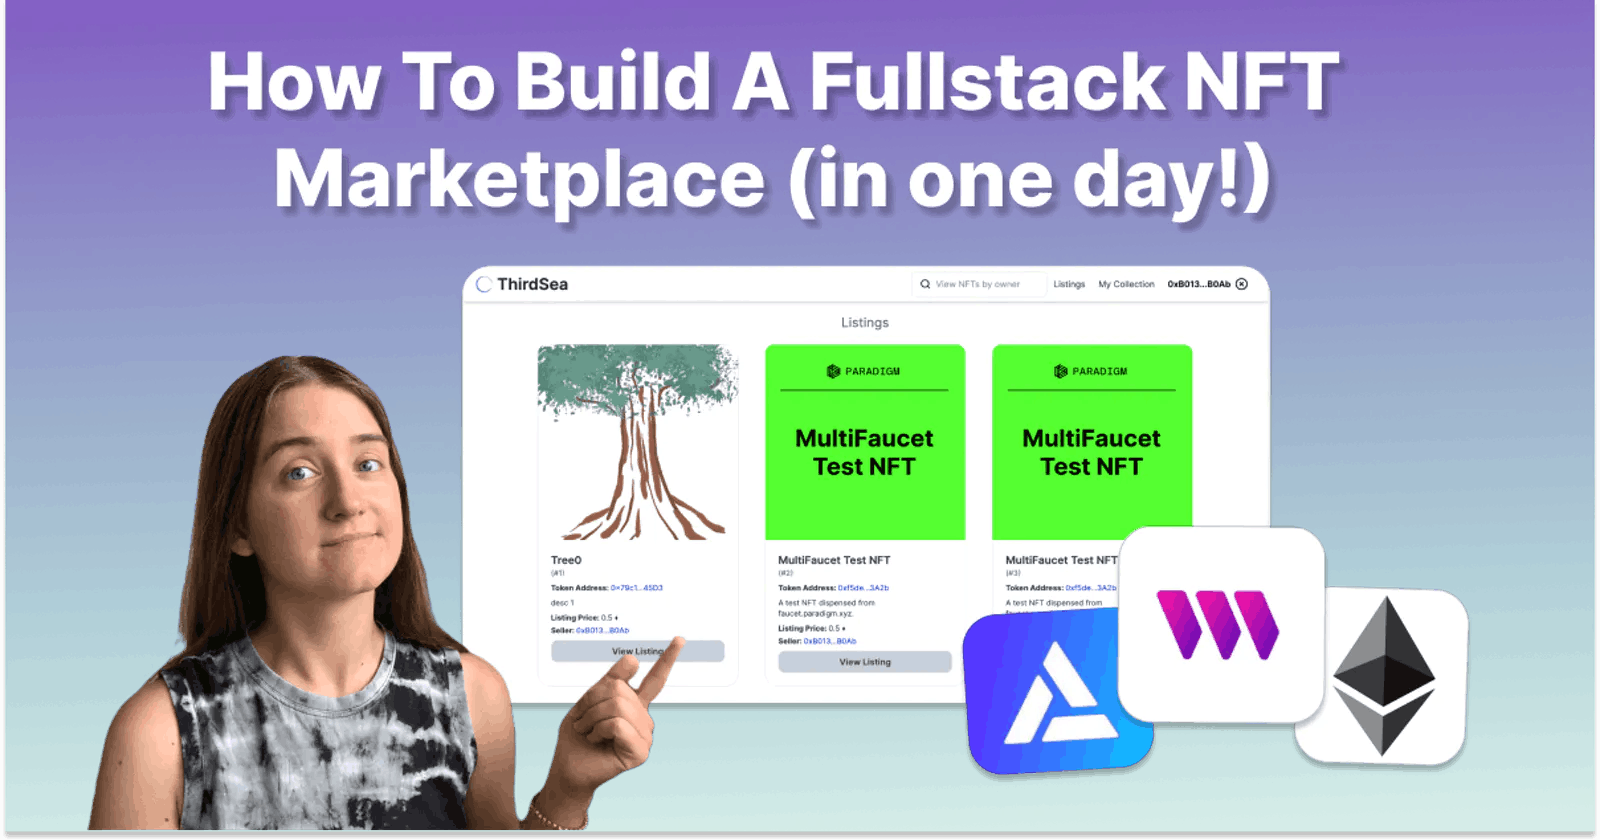 How to Build a Full Stack NFT Marketplace